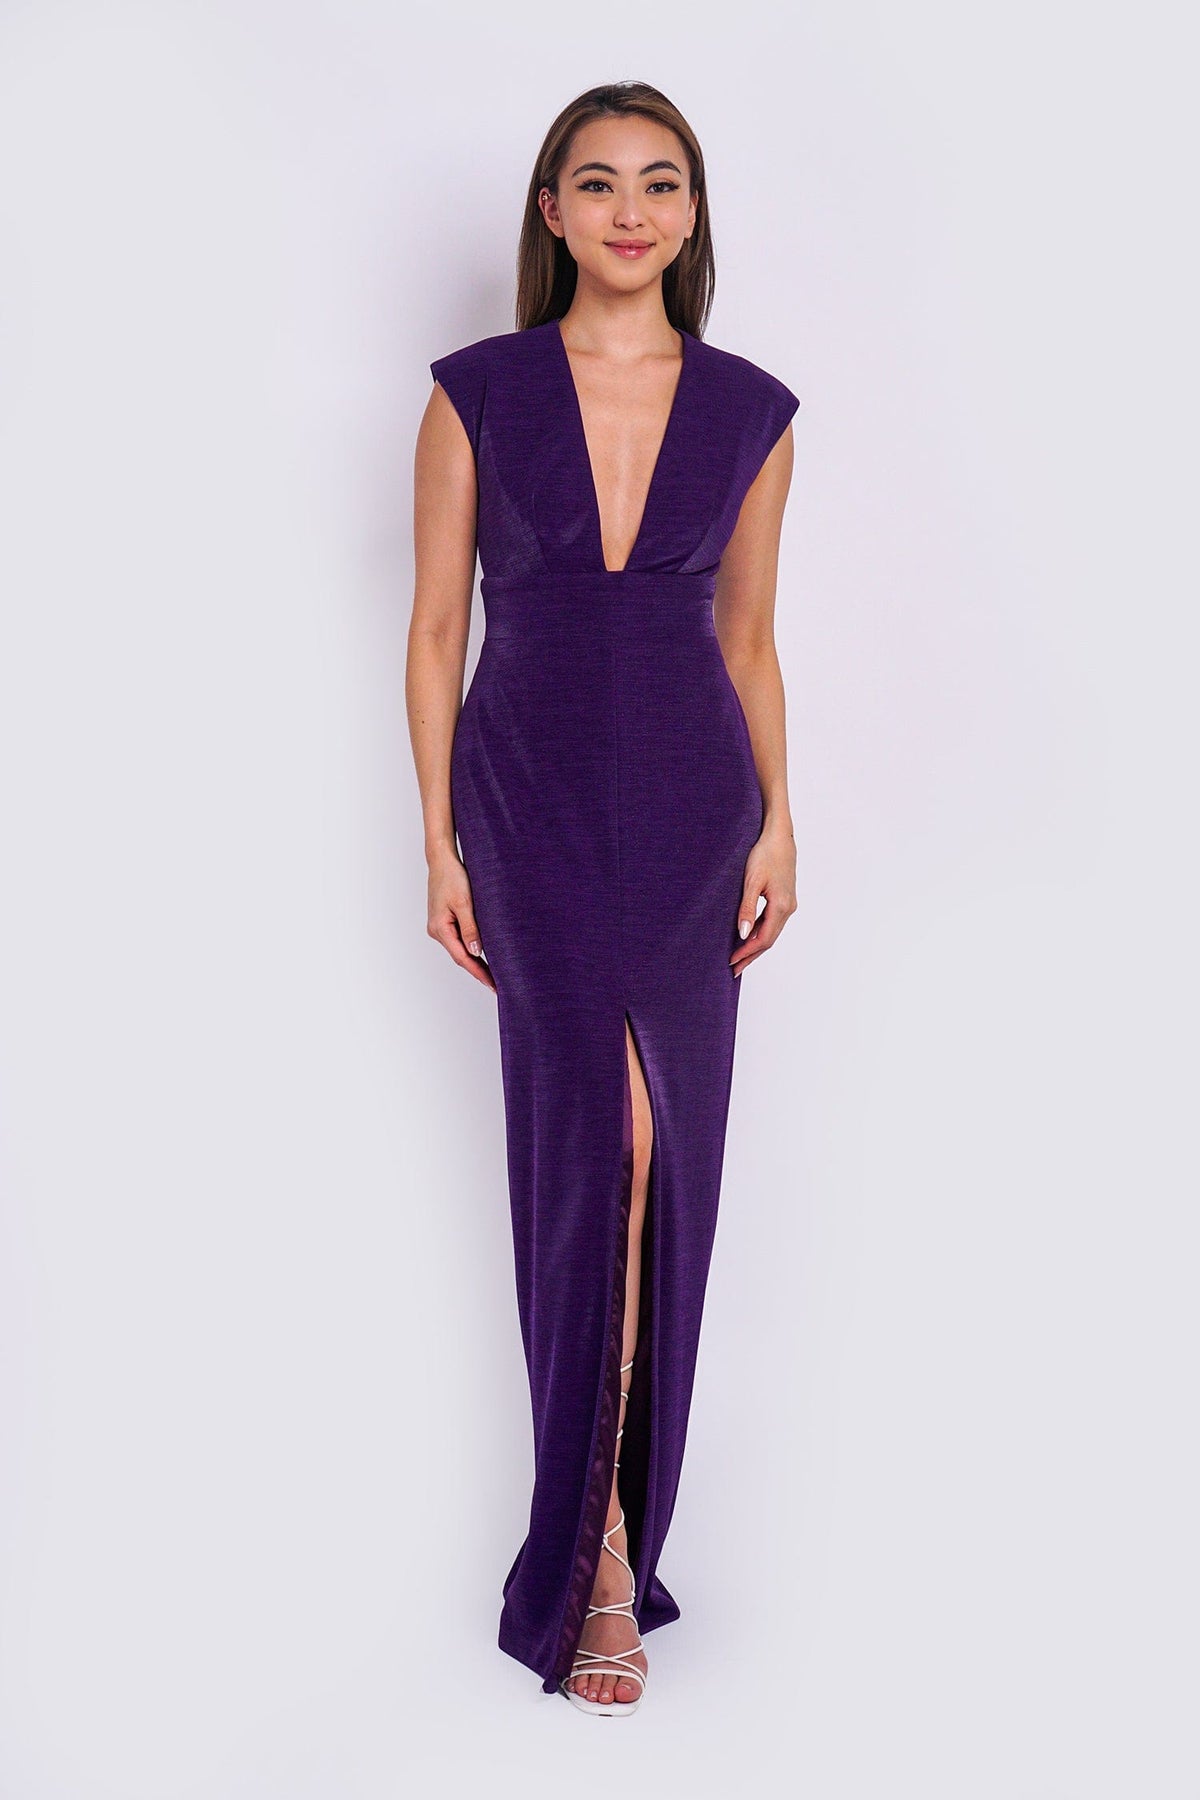 Chloe Dao gowns Purple Lux Sheen V Neck Aiden Gown